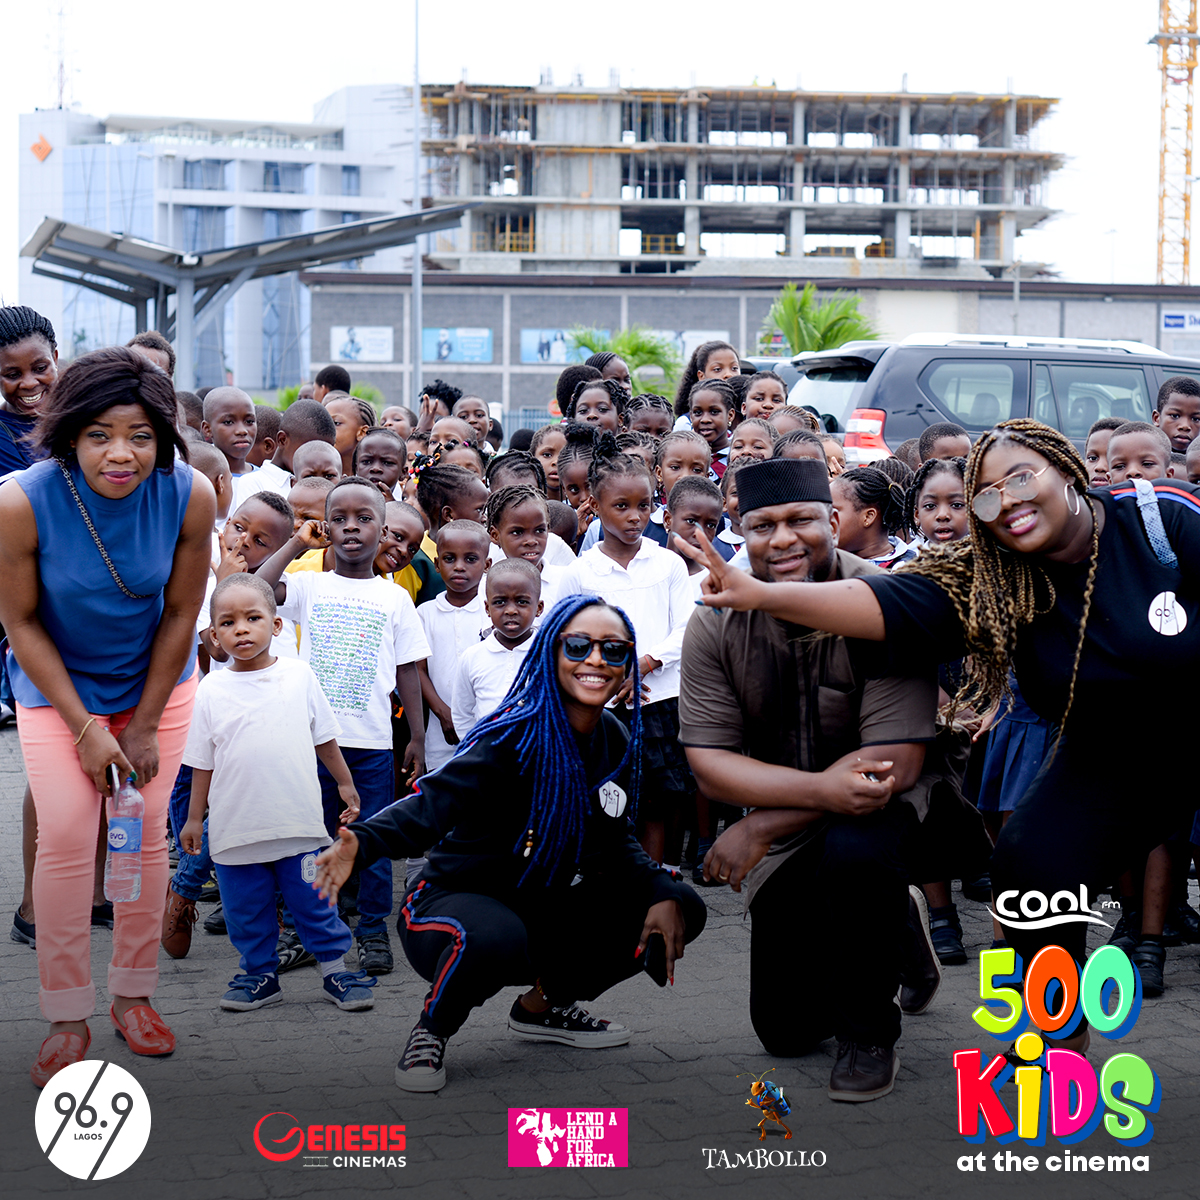 Cool FM treats 500 Kids to a Day Out at the Cinema, Stage Play & Goodies |  BellaNaija